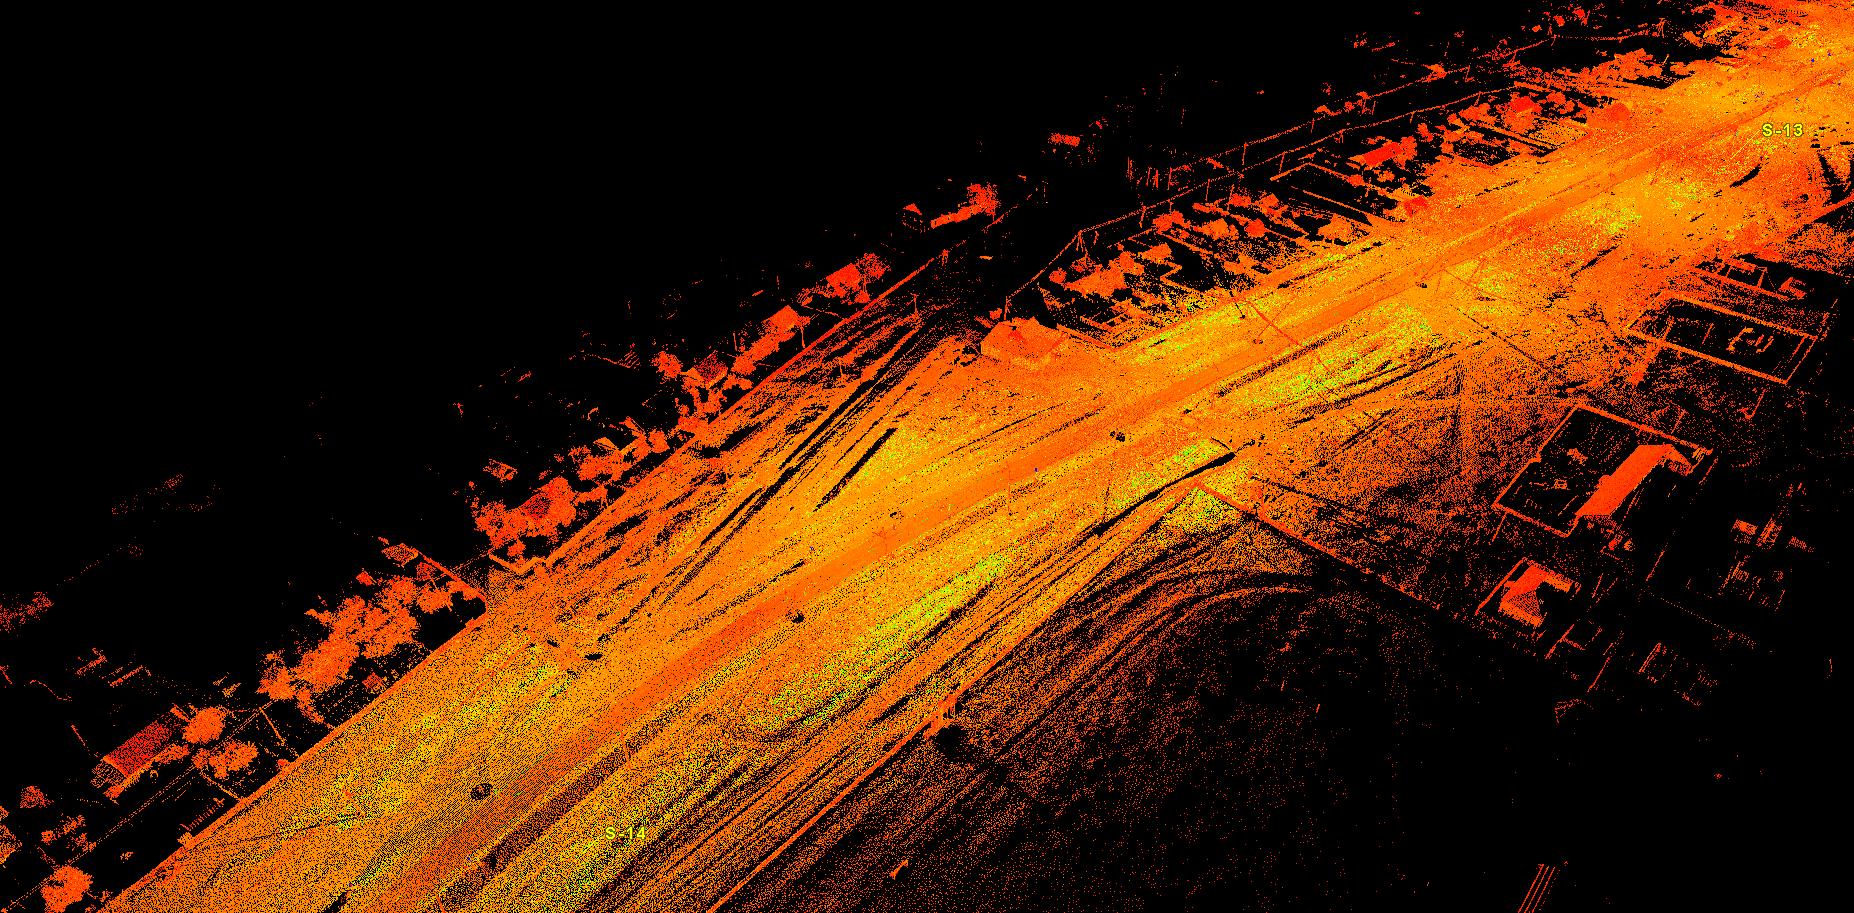 The result of laser scanning of a highway - a point cloud.